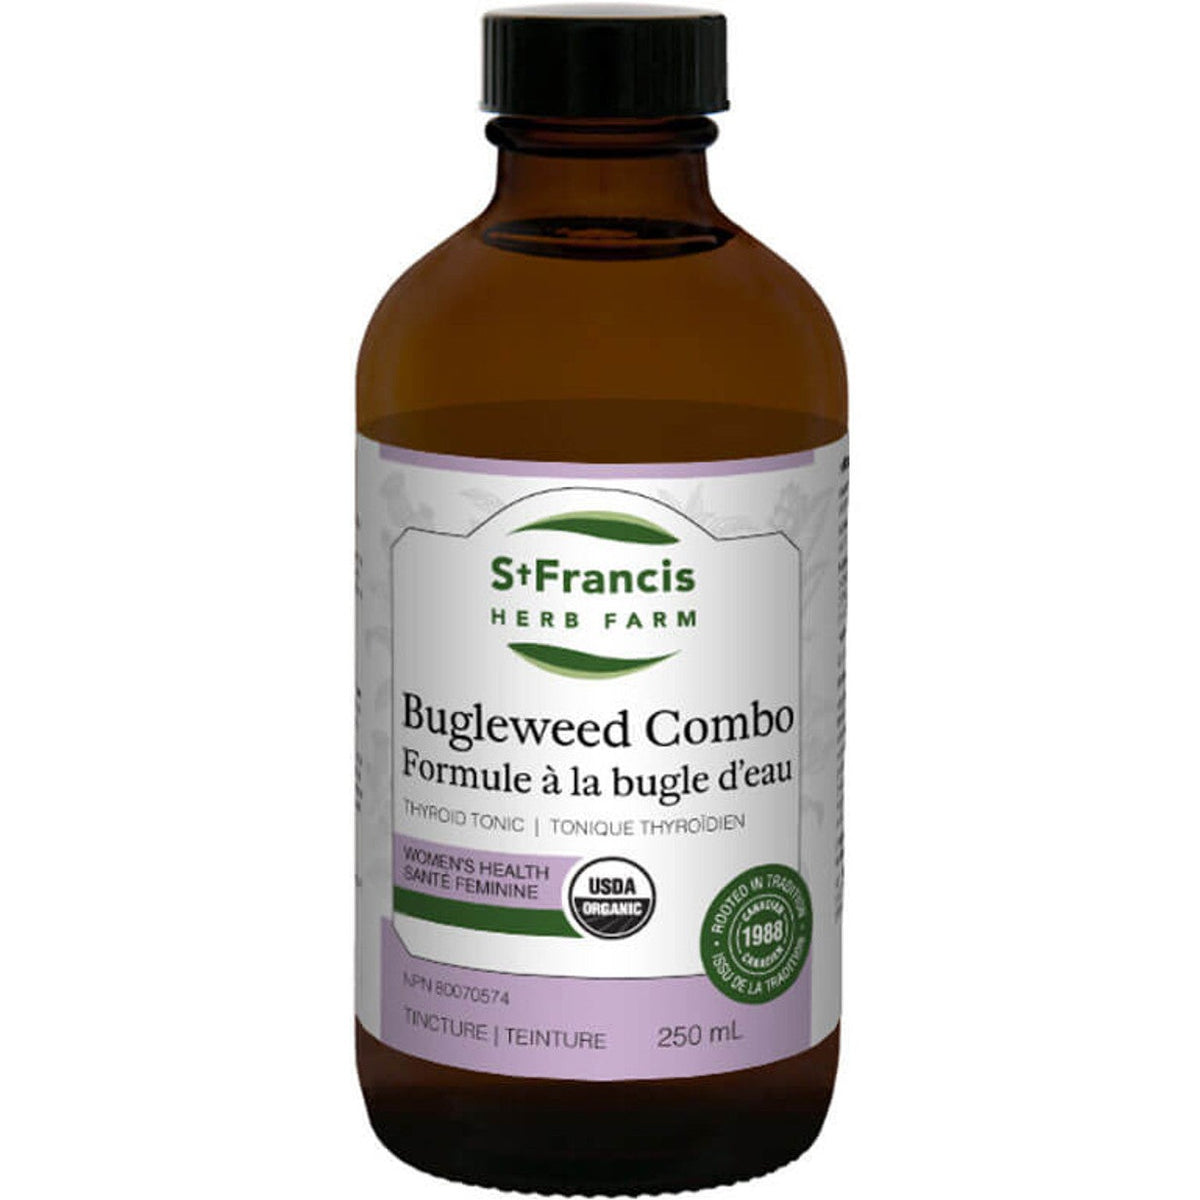 St Francis Bugleweed Combo 250 mL Supplements - Thyroid at Village Vitamin Store